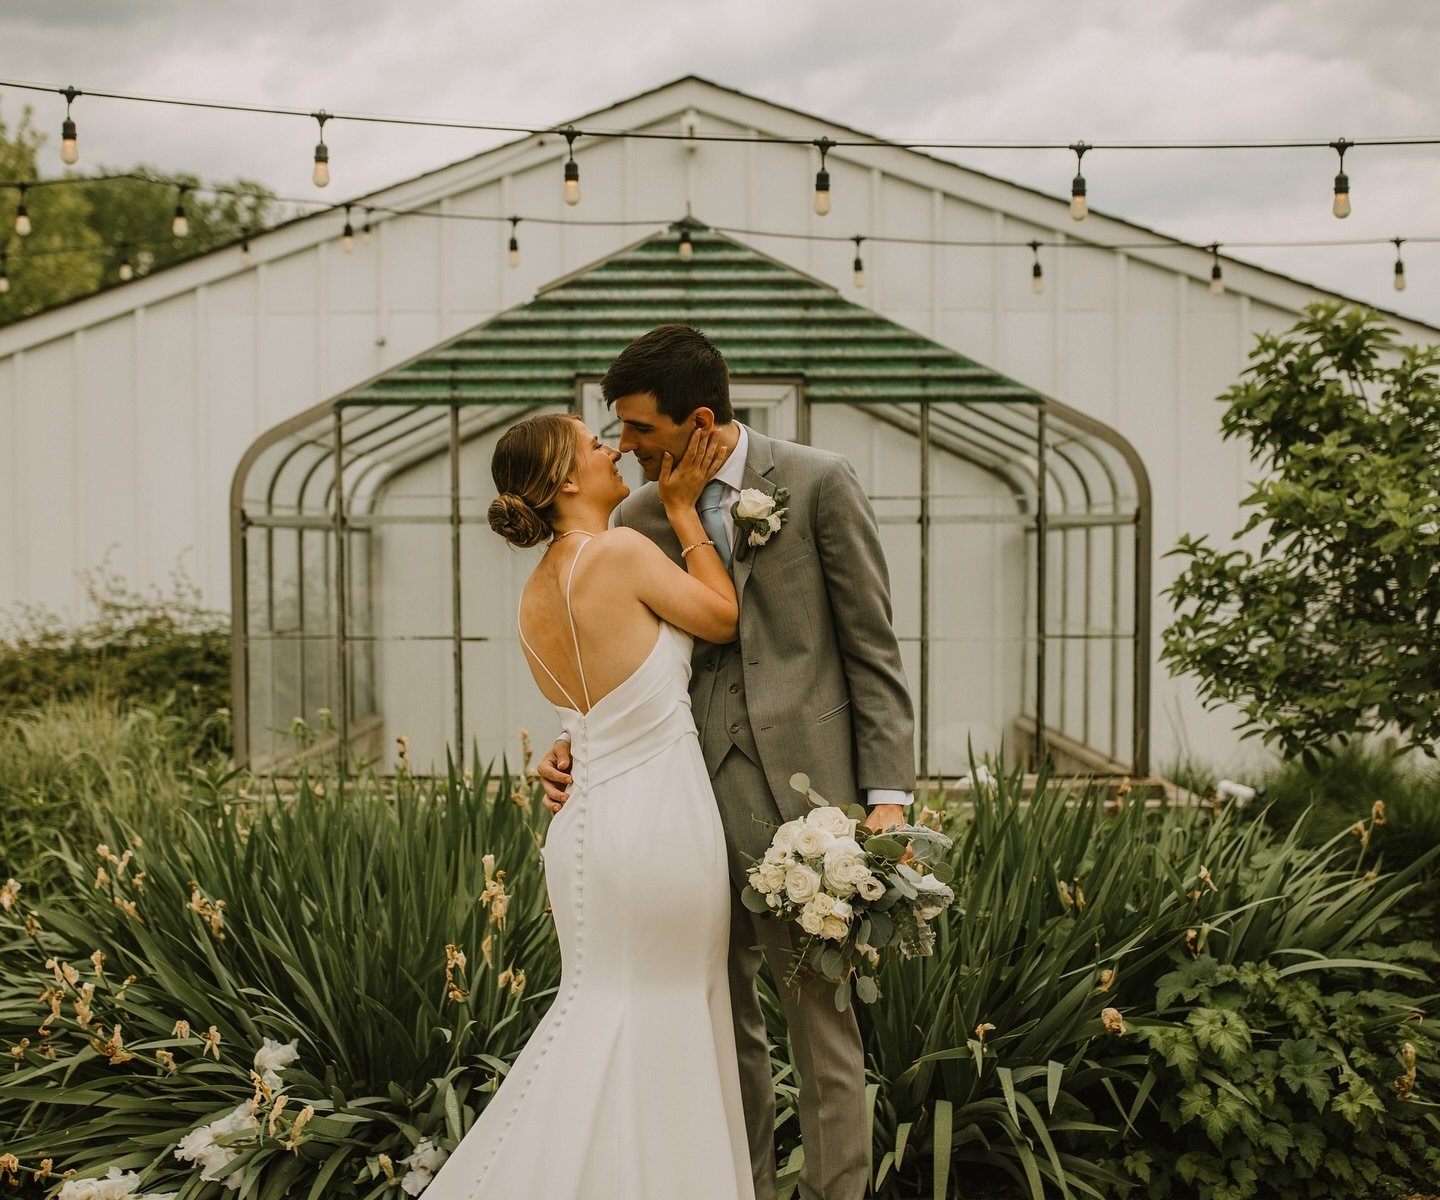 Kaitlyn &amp; Logan lucked out on Friday with the rain stopping at all the perfect times 🤍 it was a gorgeous day and we loved capturing all of these sweet moments!